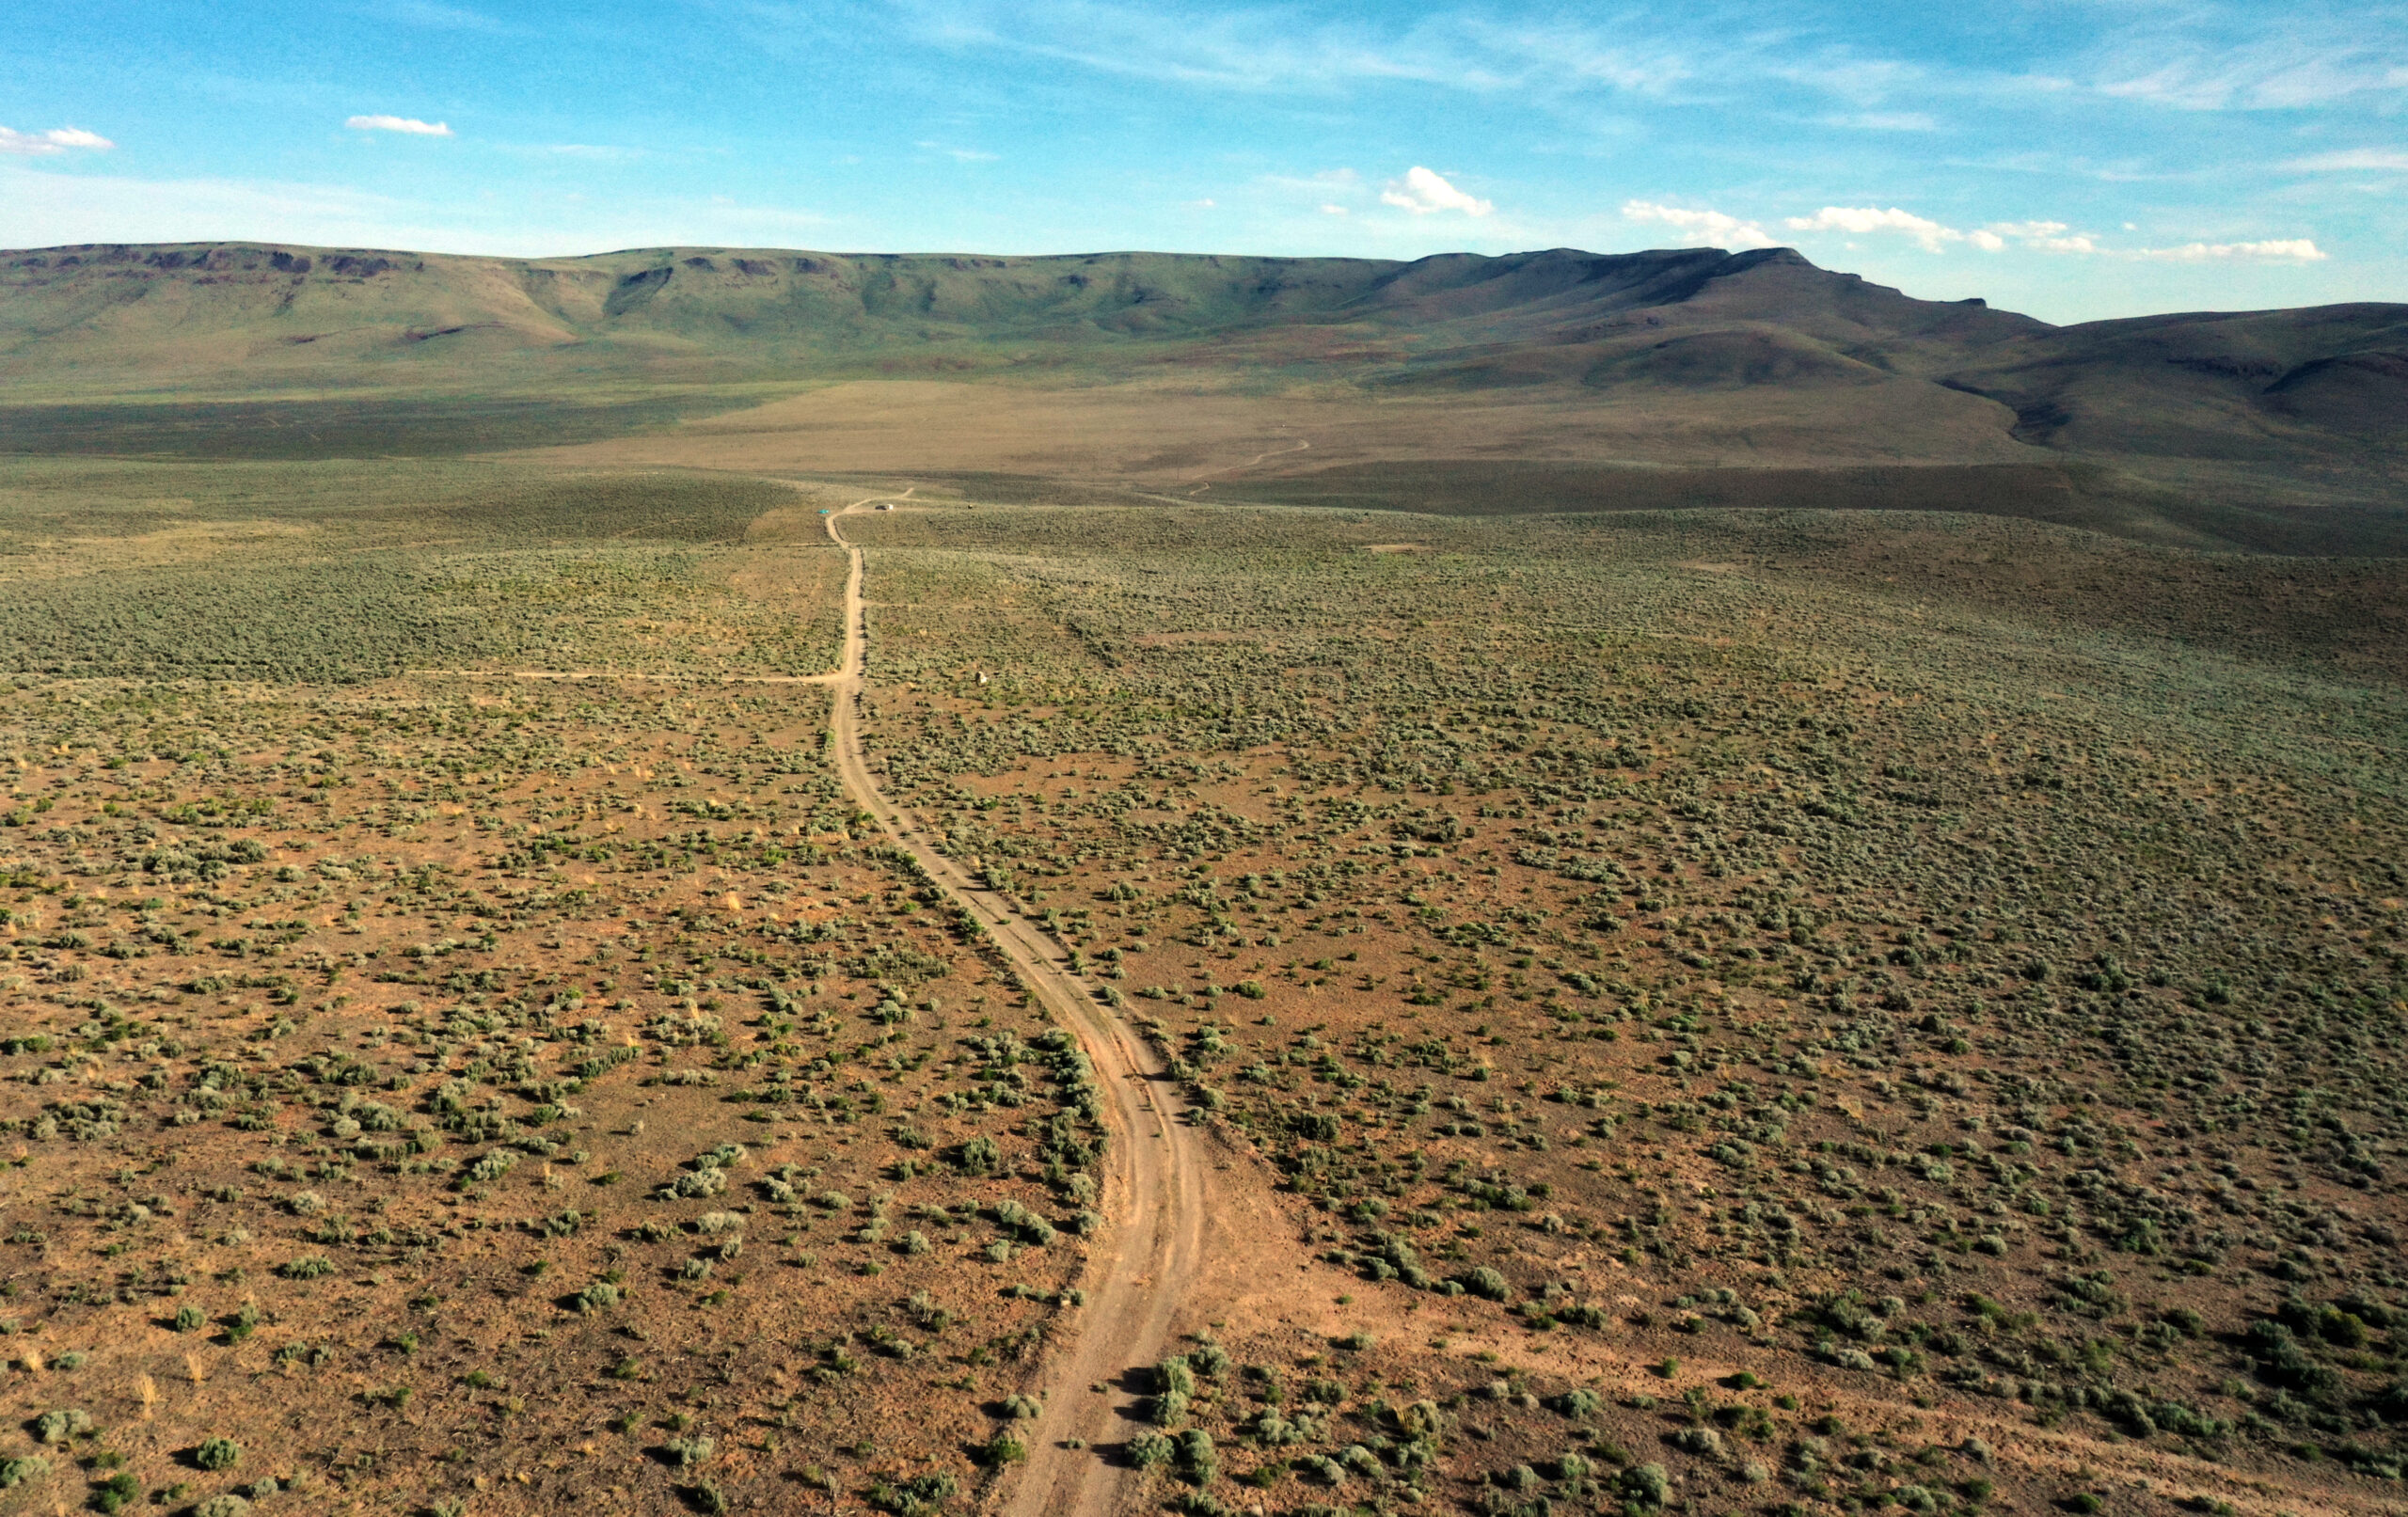 An aerial photo of an arid plain surrounded by mountains with a blue sky above dotted with a few white clouds.